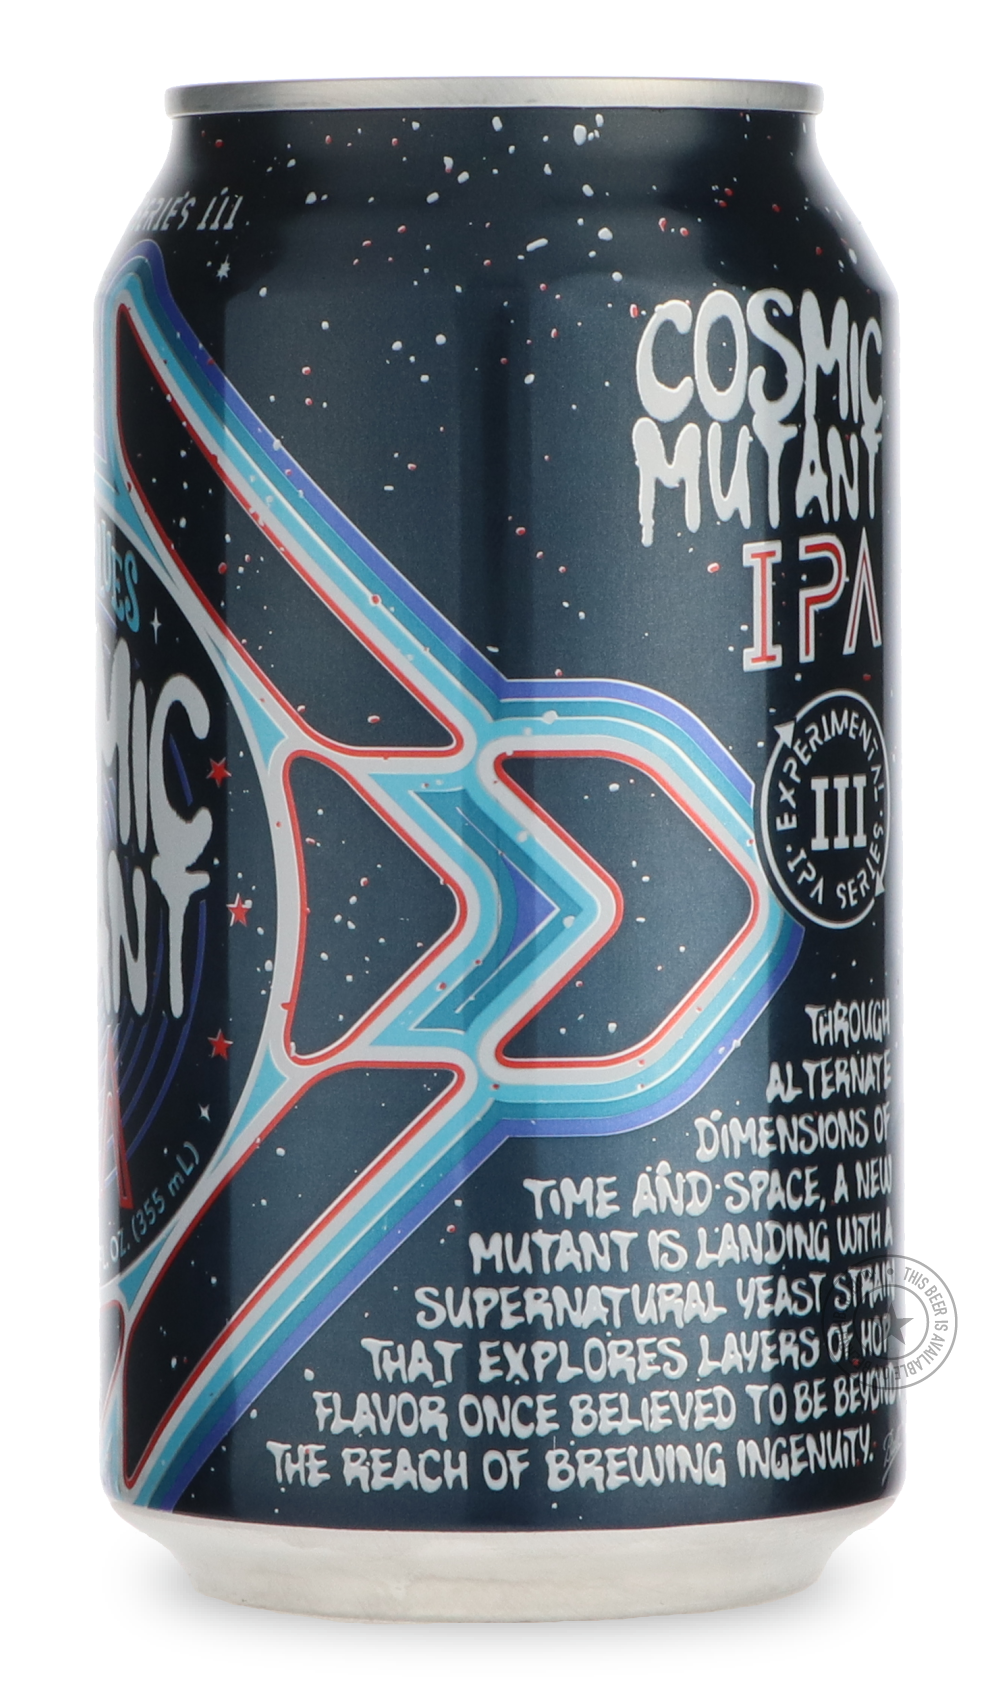 -Oskar Blues- Cosmic Mutant-IPA- Only @ Beer Republic - The best online beer store for American & Canadian craft beer - Buy beer online from the USA and Canada - Bier online kopen - Amerikaans bier kopen - Craft beer store - Craft beer kopen - Amerikanisch bier kaufen - Bier online kaufen - Acheter biere online - IPA - Stout - Porter - New England IPA - Hazy IPA - Imperial Stout - Barrel Aged - Barrel Aged Imperial Stout - Brown - Dark beer - Blond - Blonde - Pilsner - Lager - Wheat - Weizen - Amber - Barle